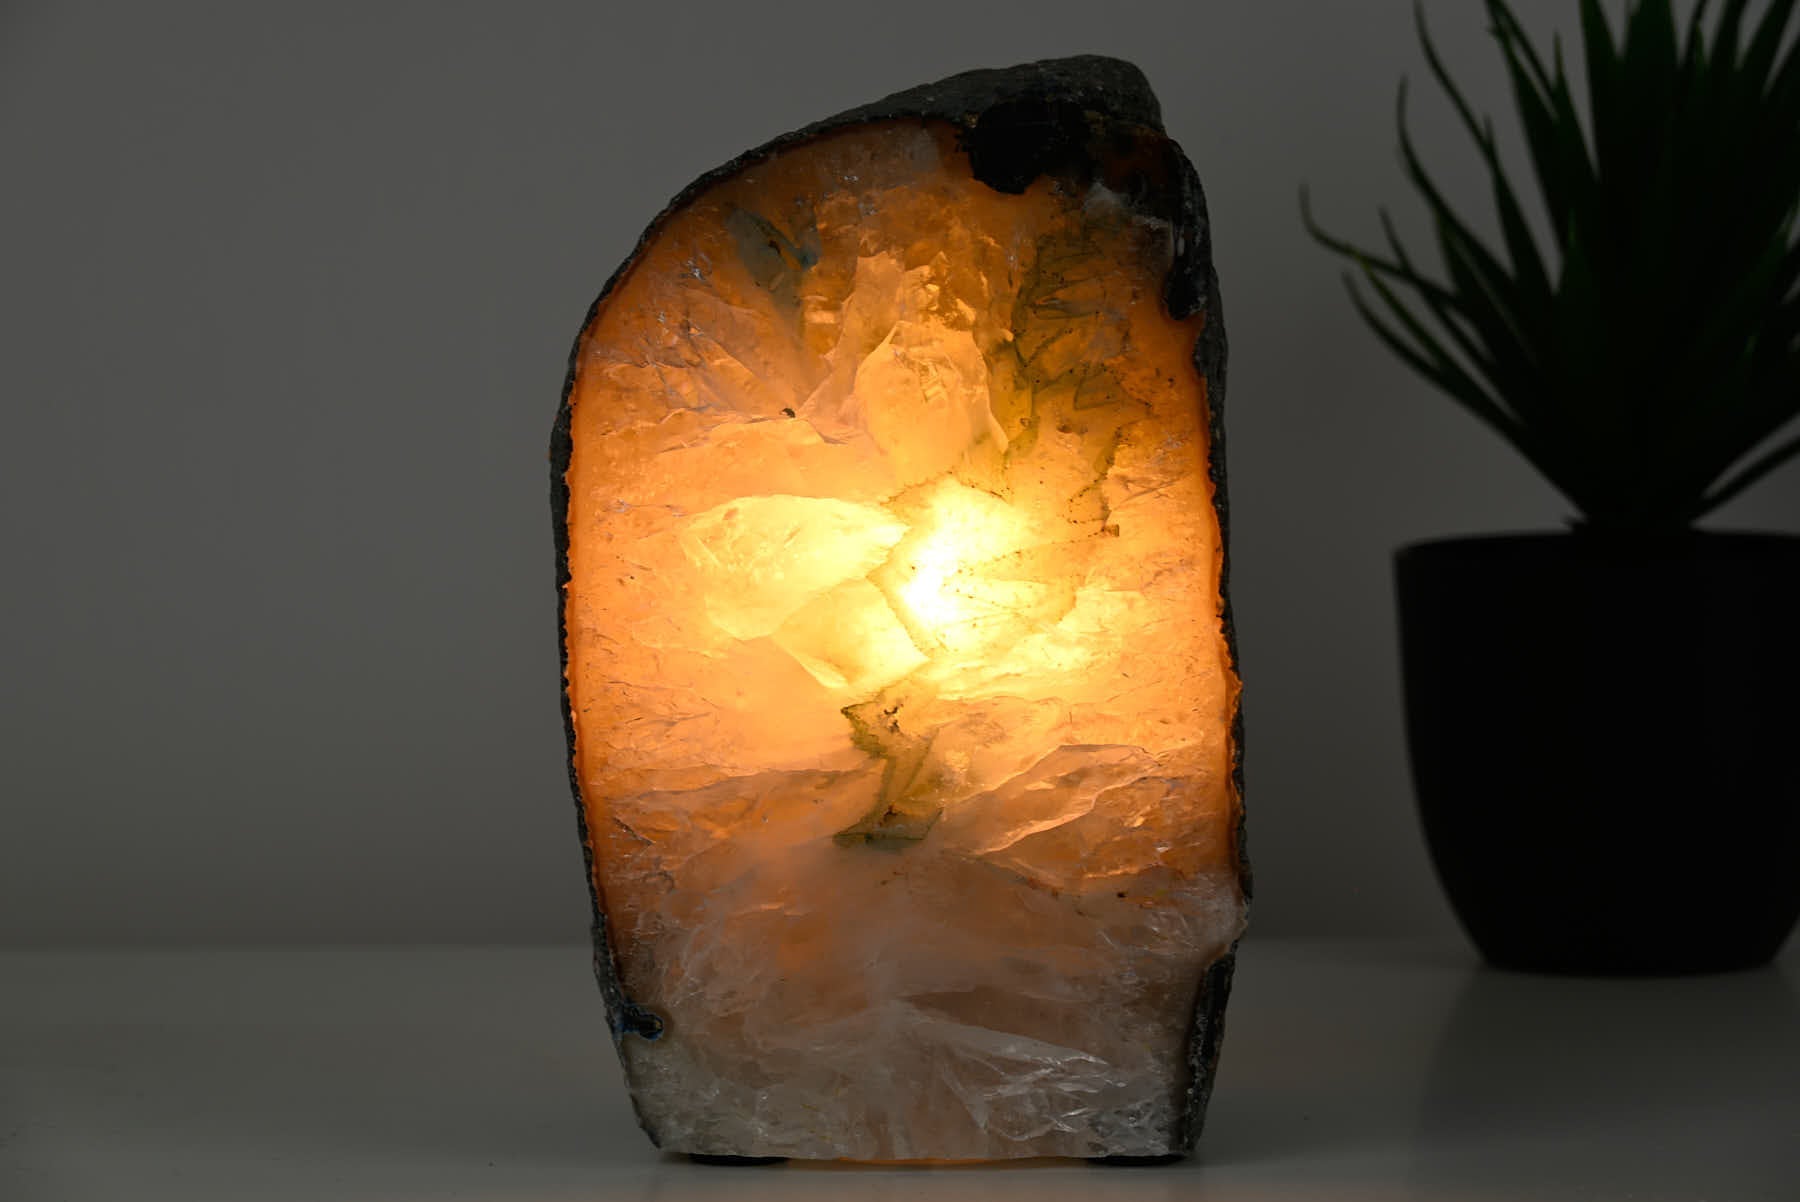 Teal Agate Night Lamp - 19cm tall - #LATEAL-38033